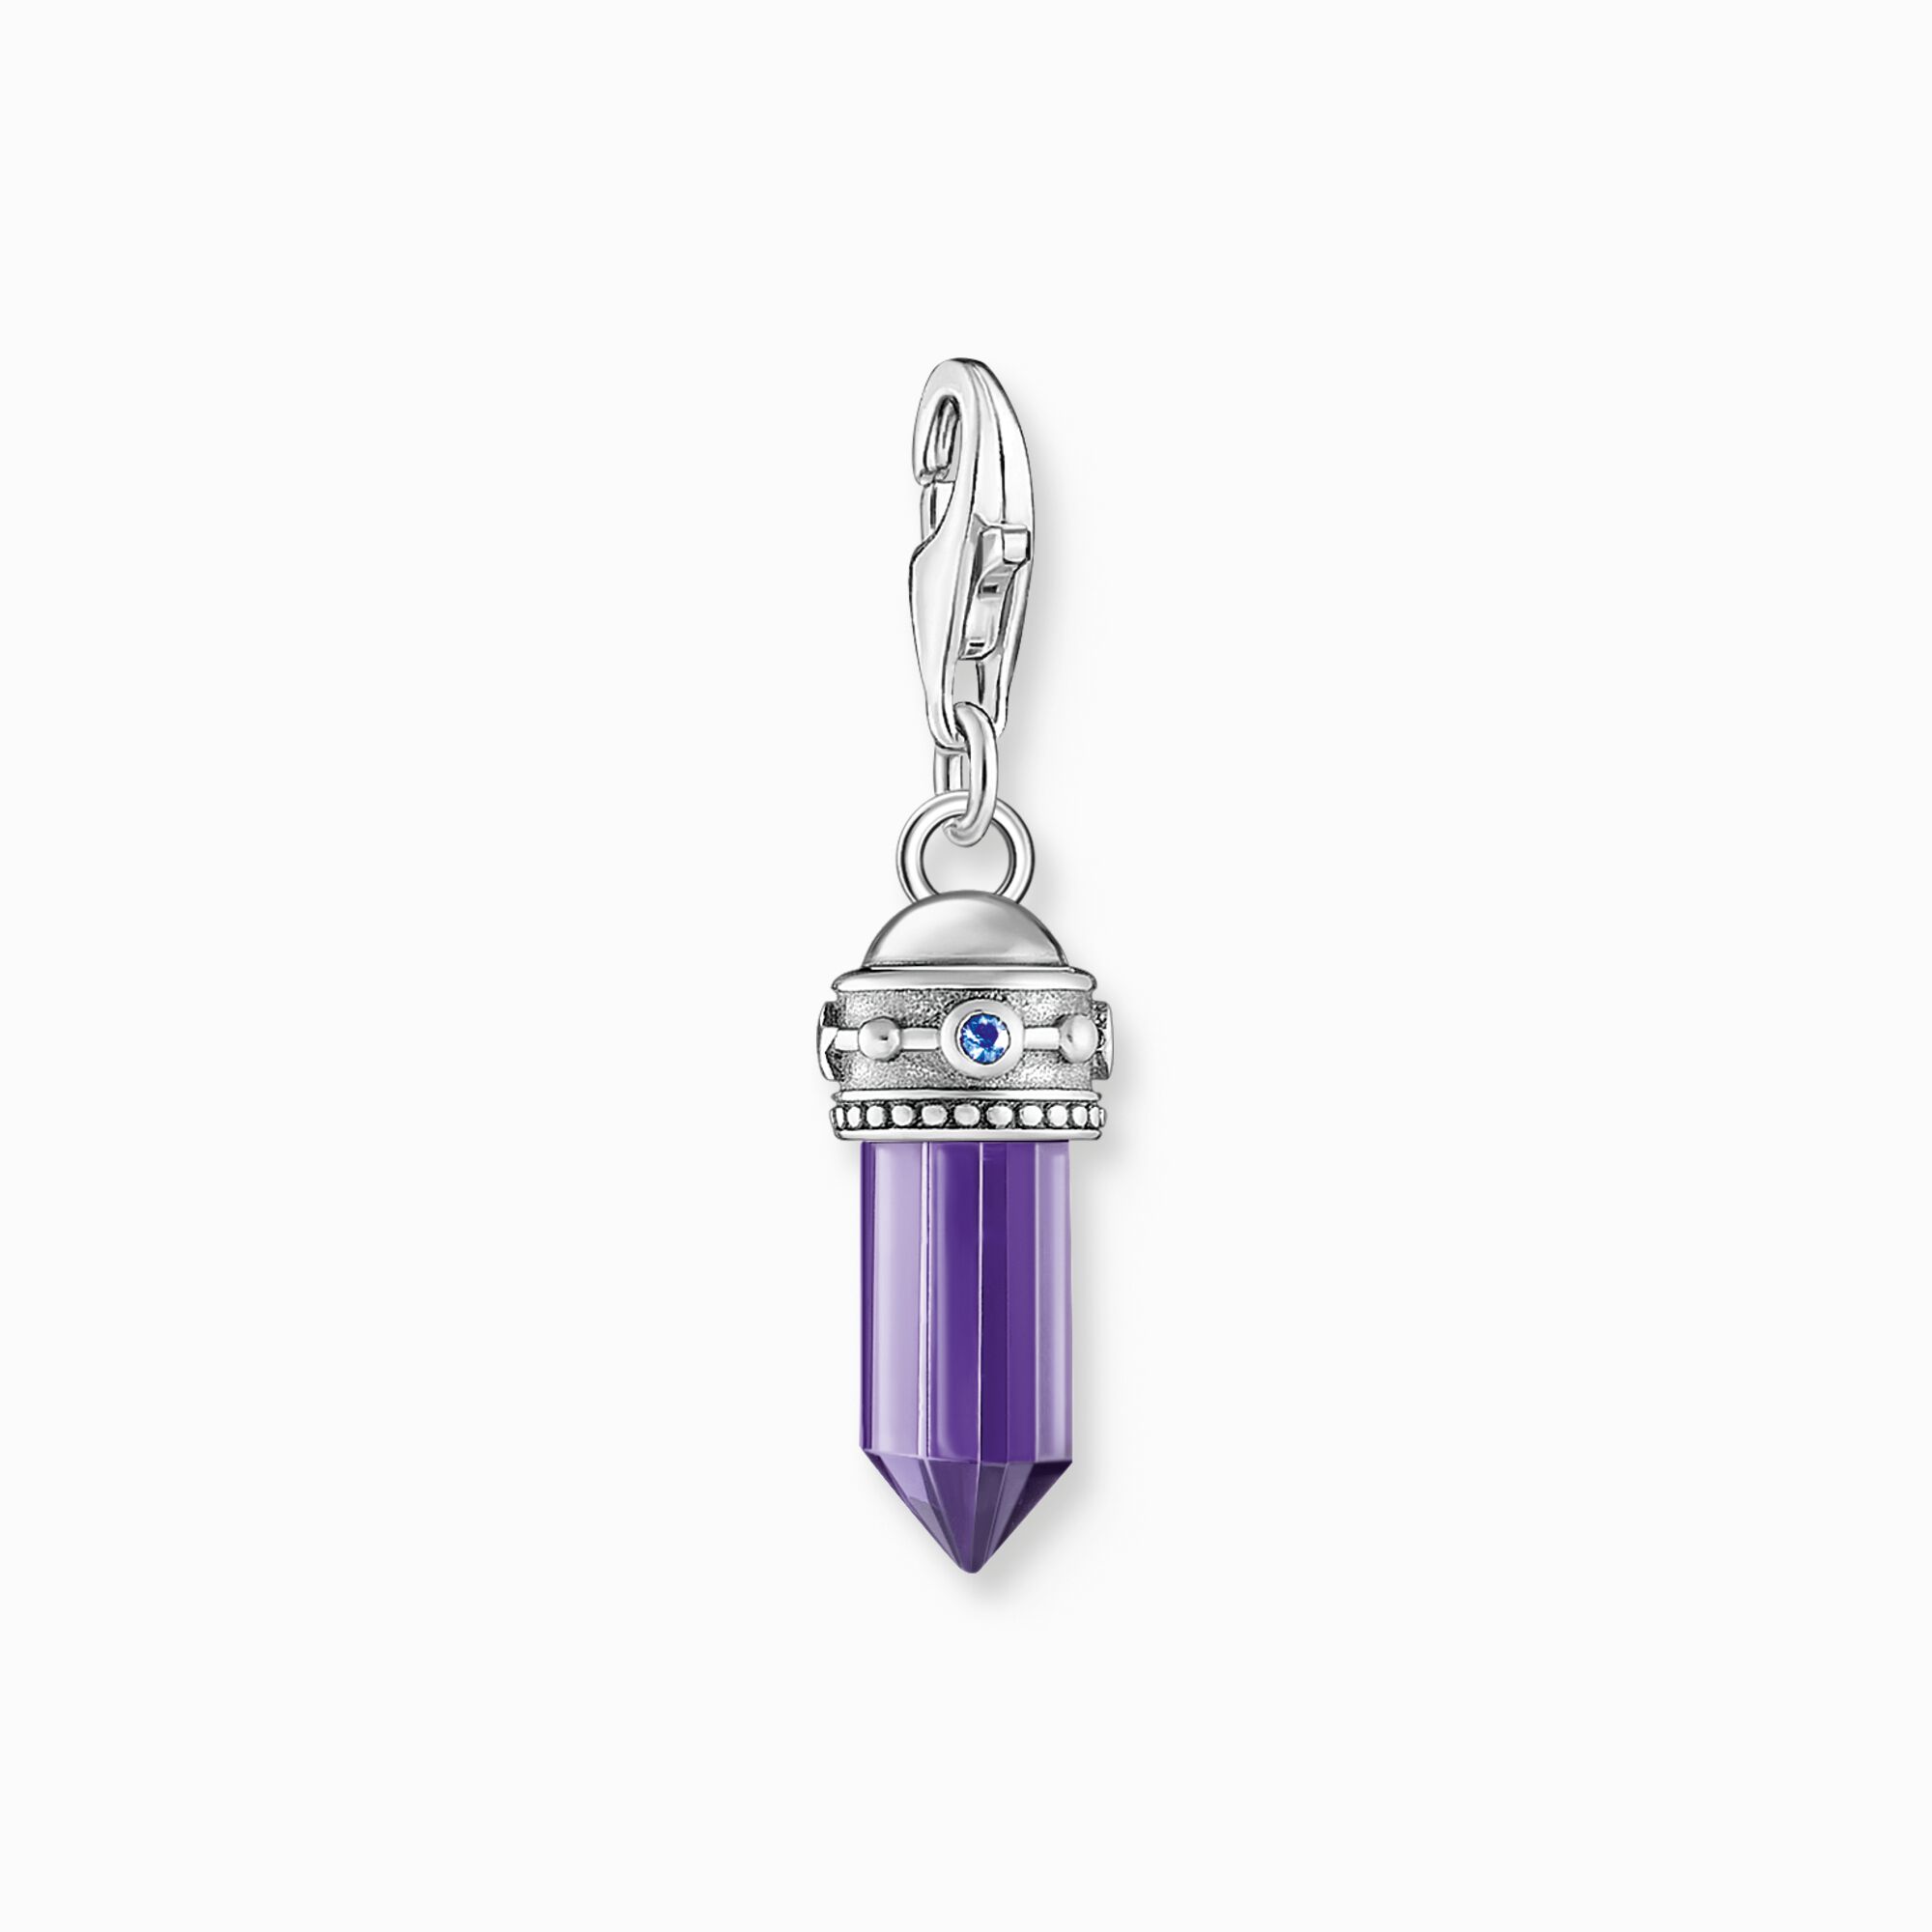 Charm pendant hexagon with imitation amethyst and fine symbols silver from the Charm Club collection in the THOMAS SABO online store